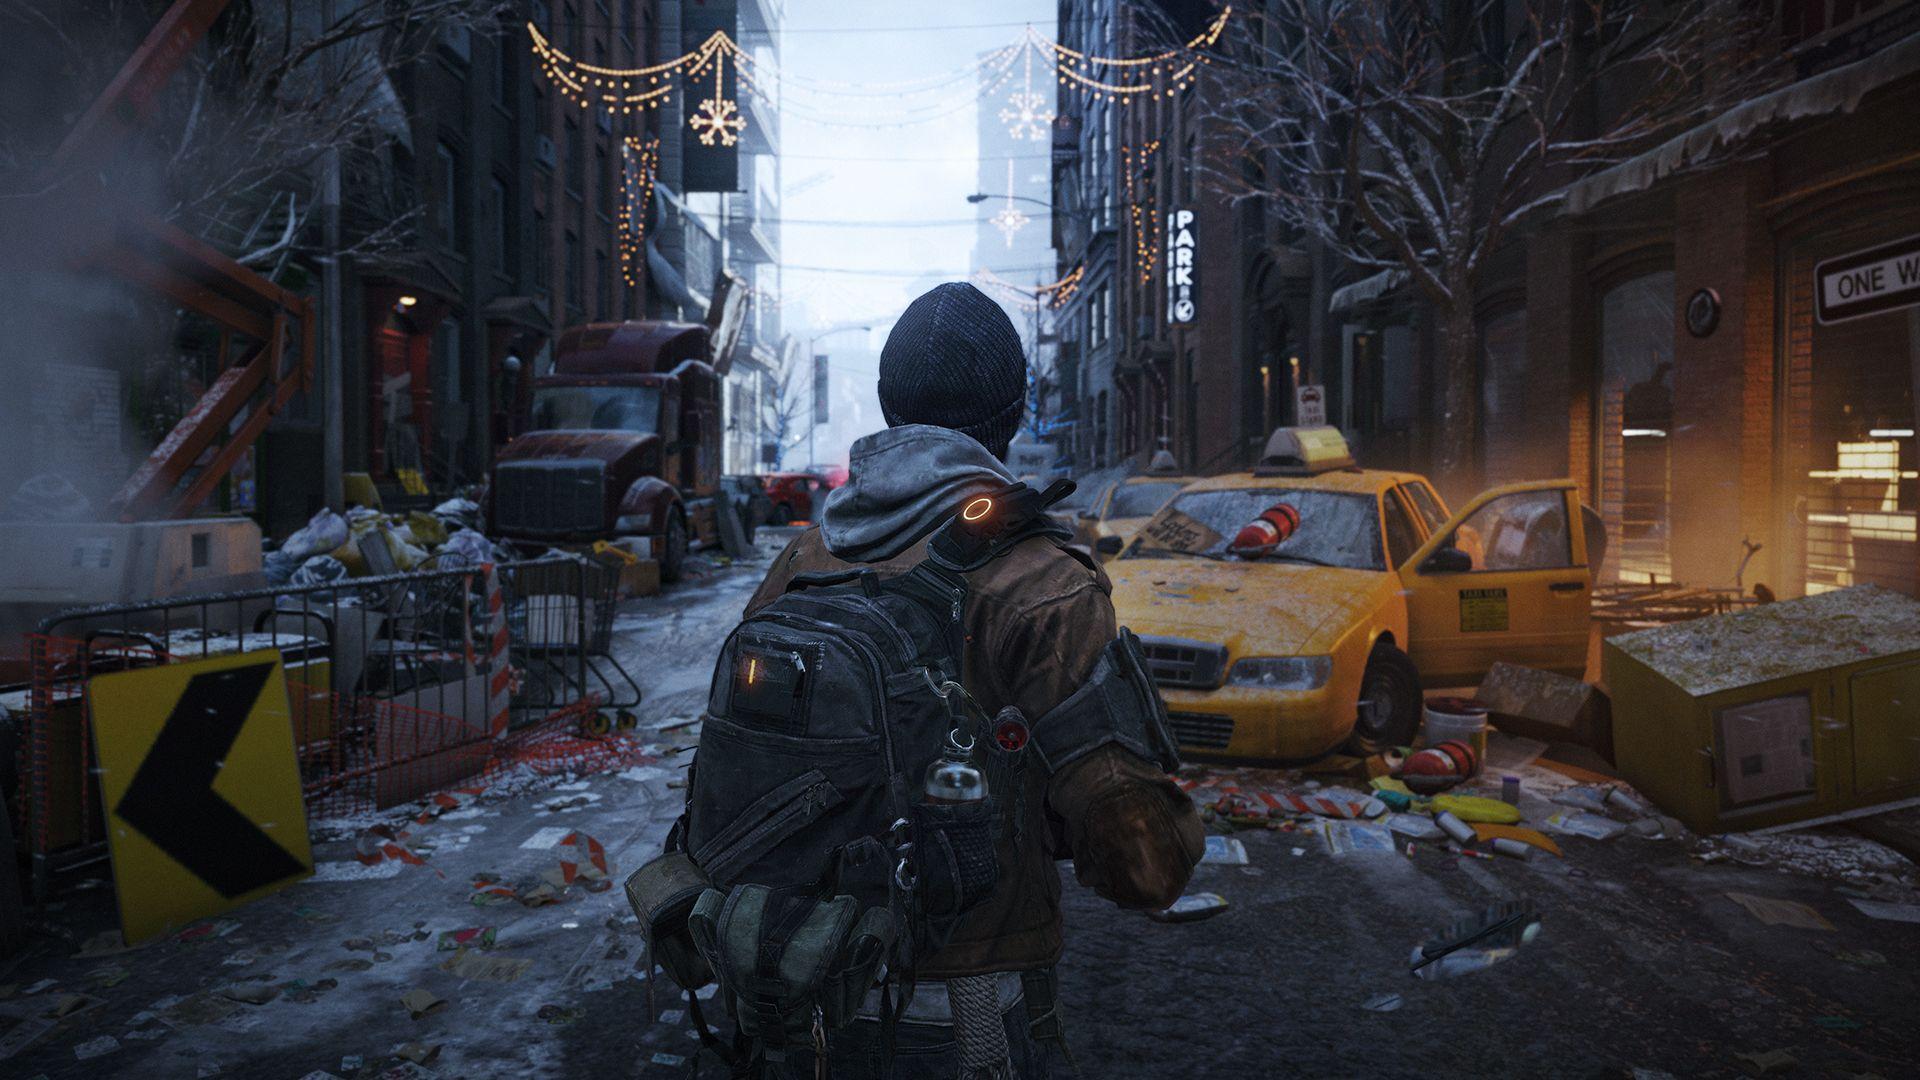 Tom Clancys The Division Wallpaper Picture #rk71m60zbz